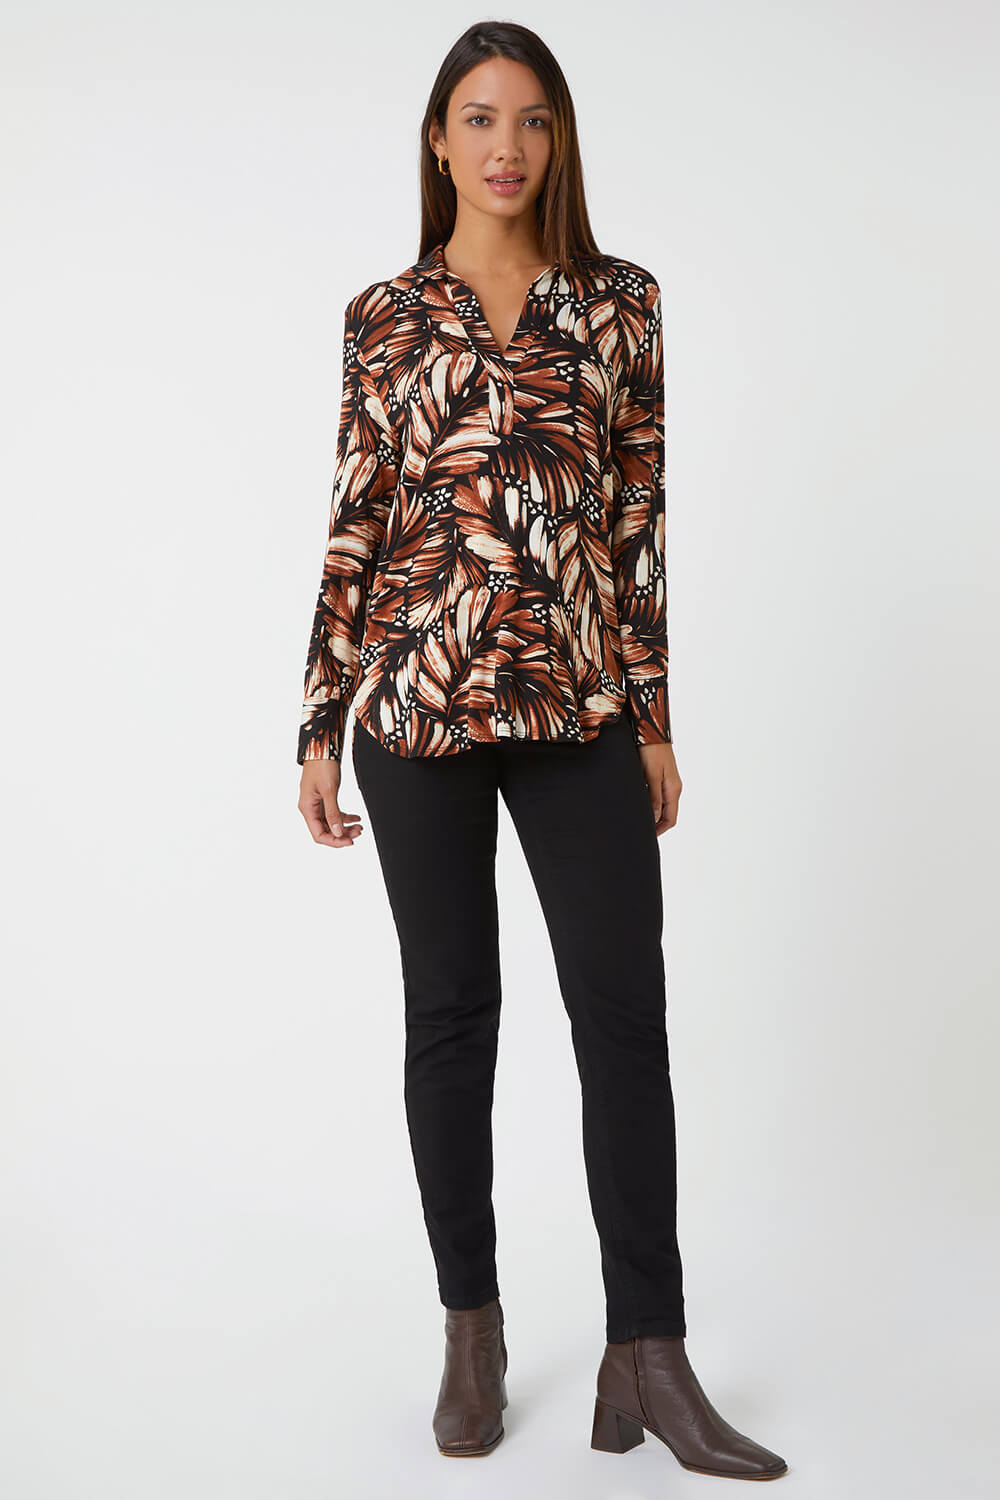 Stone Feather Print Stretch Shirt, Image 2 of 5